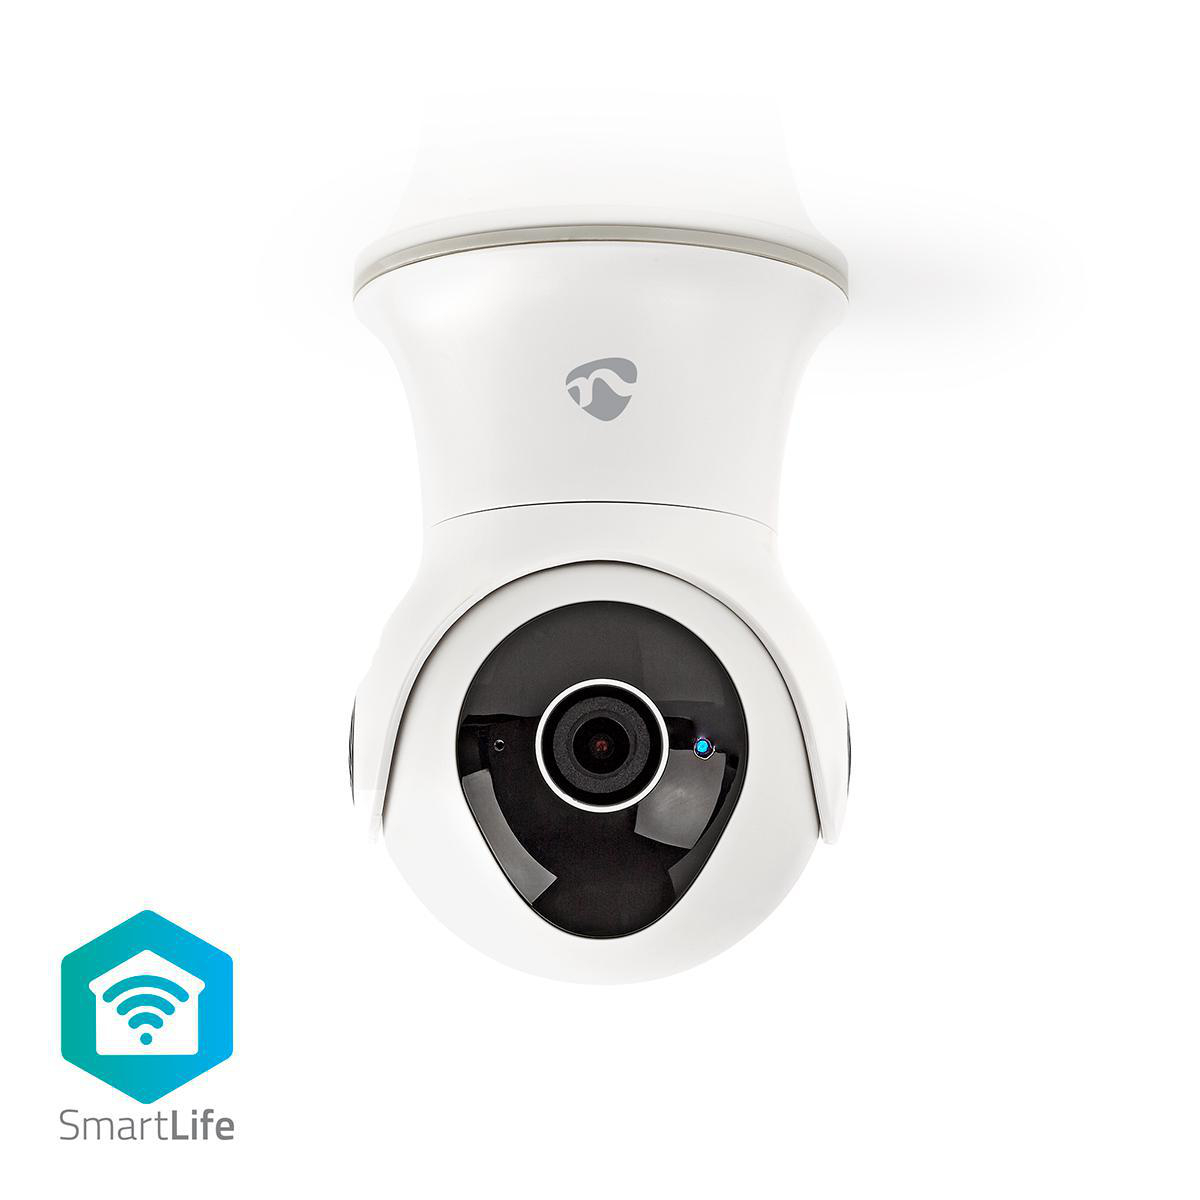 SmartLife Outdoor Camera, Wi-Fi, Full HD 1080p, IP65, Max. battery life:  4 months, Cloud Storage (optional) / microSD (not included), 5 V DC, With motion sensor, Night vision